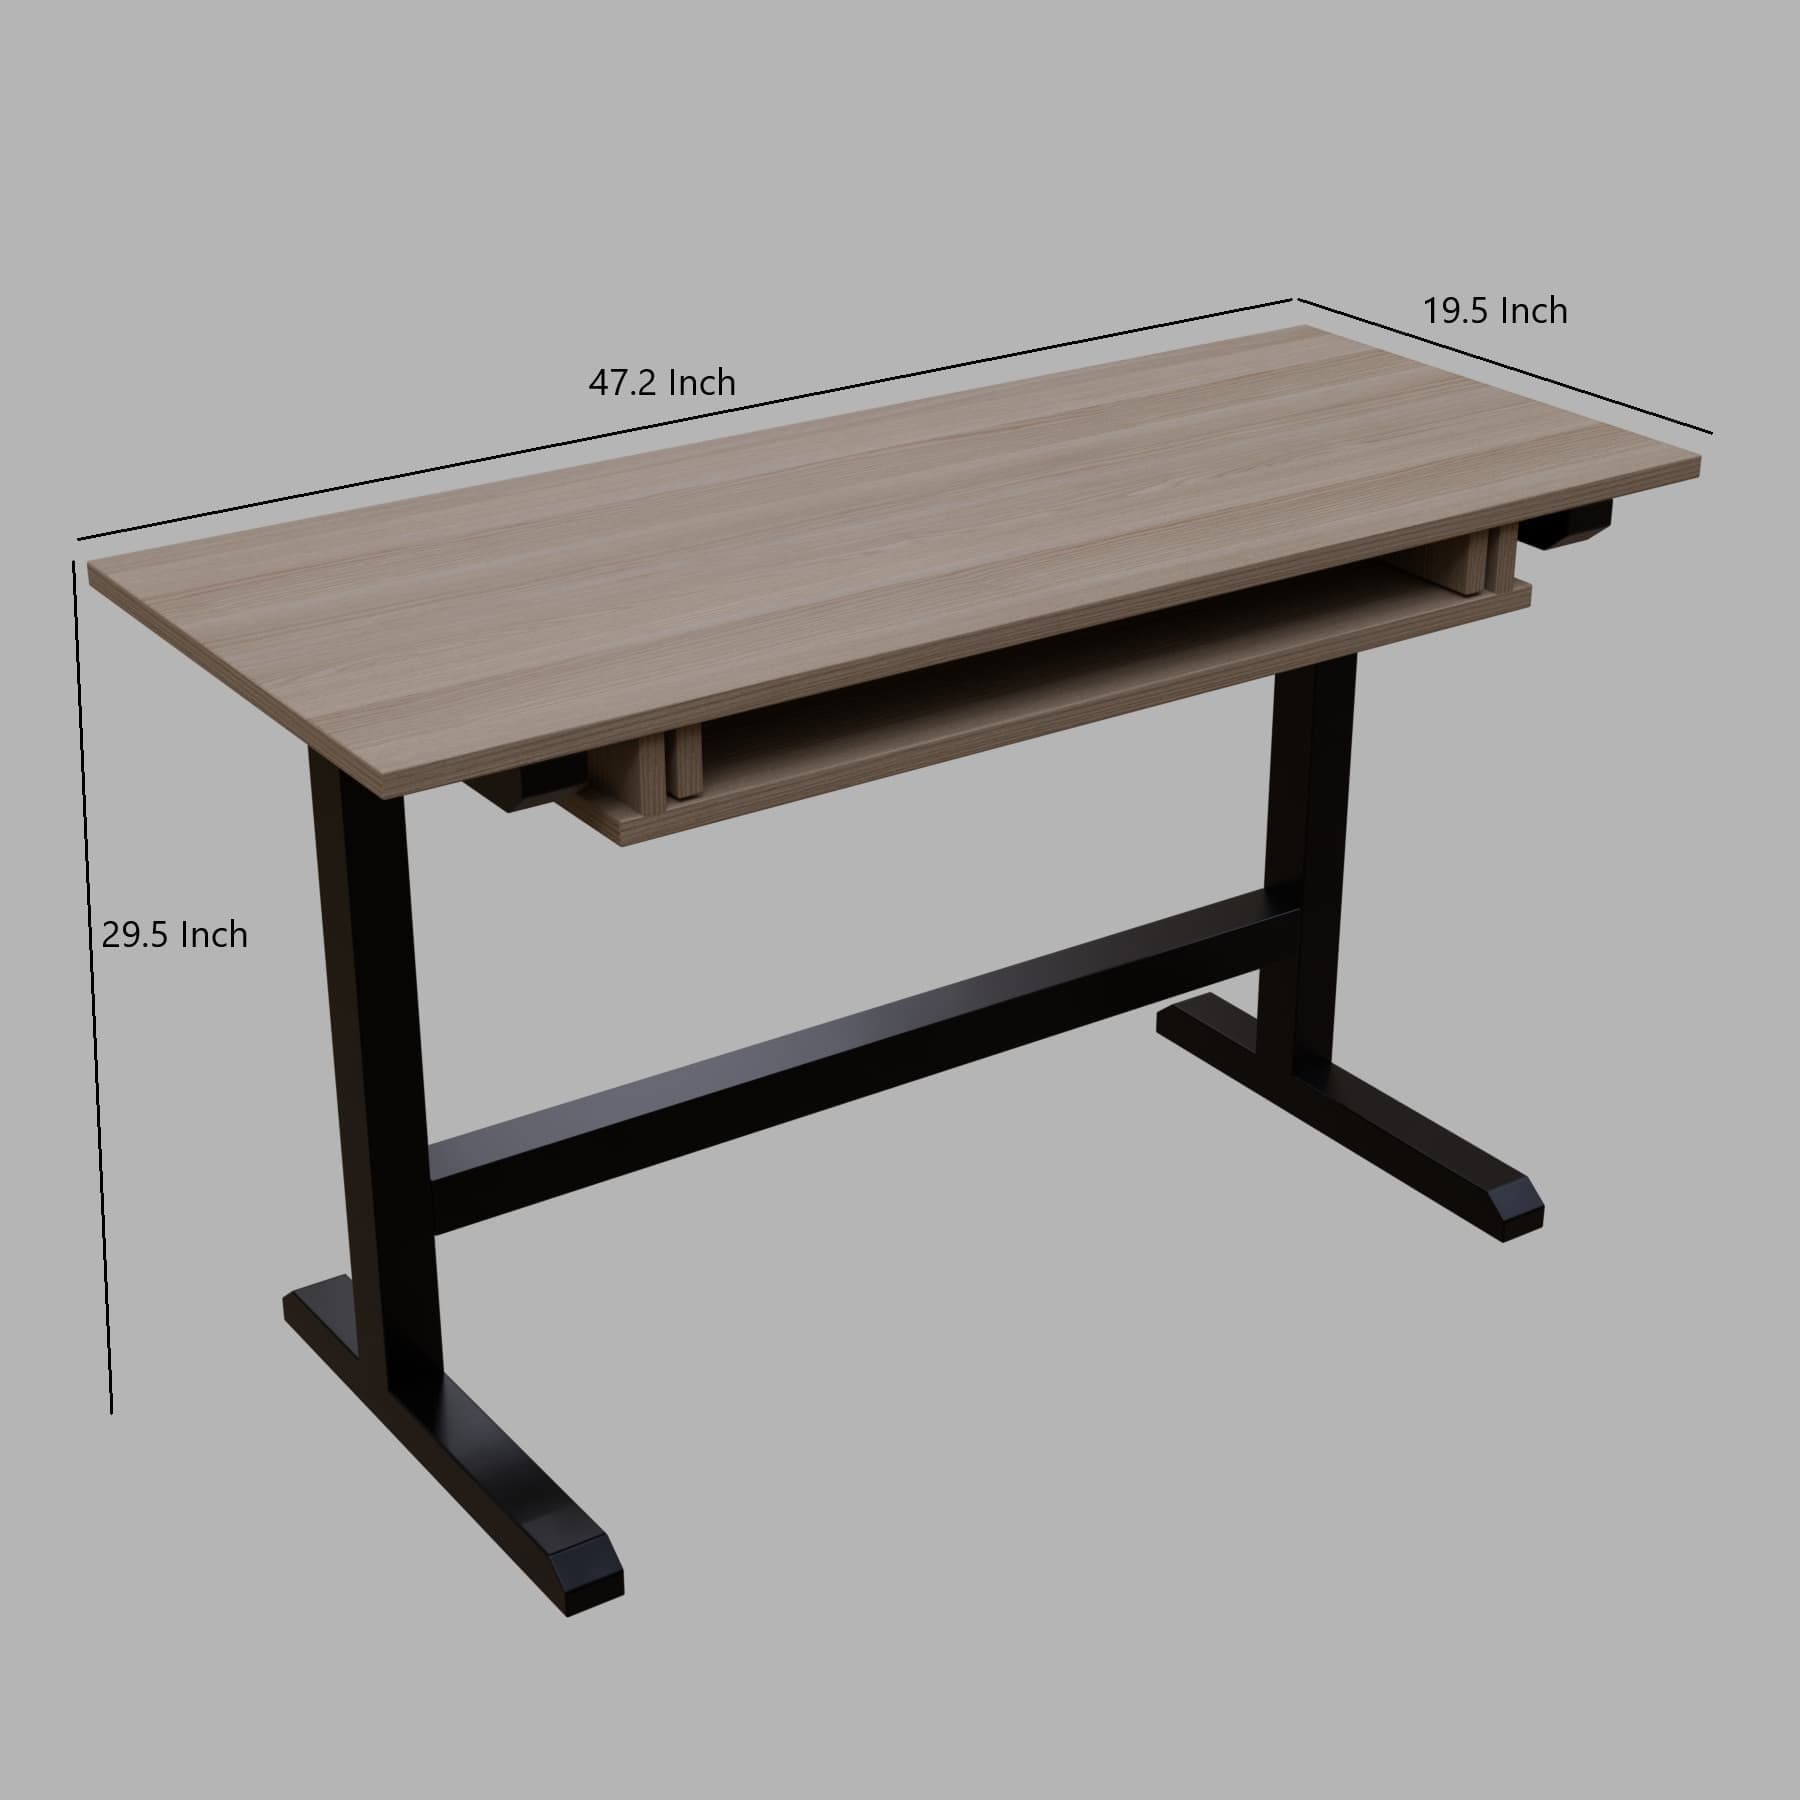 Study table with keyboard tray perfect for gaming desk